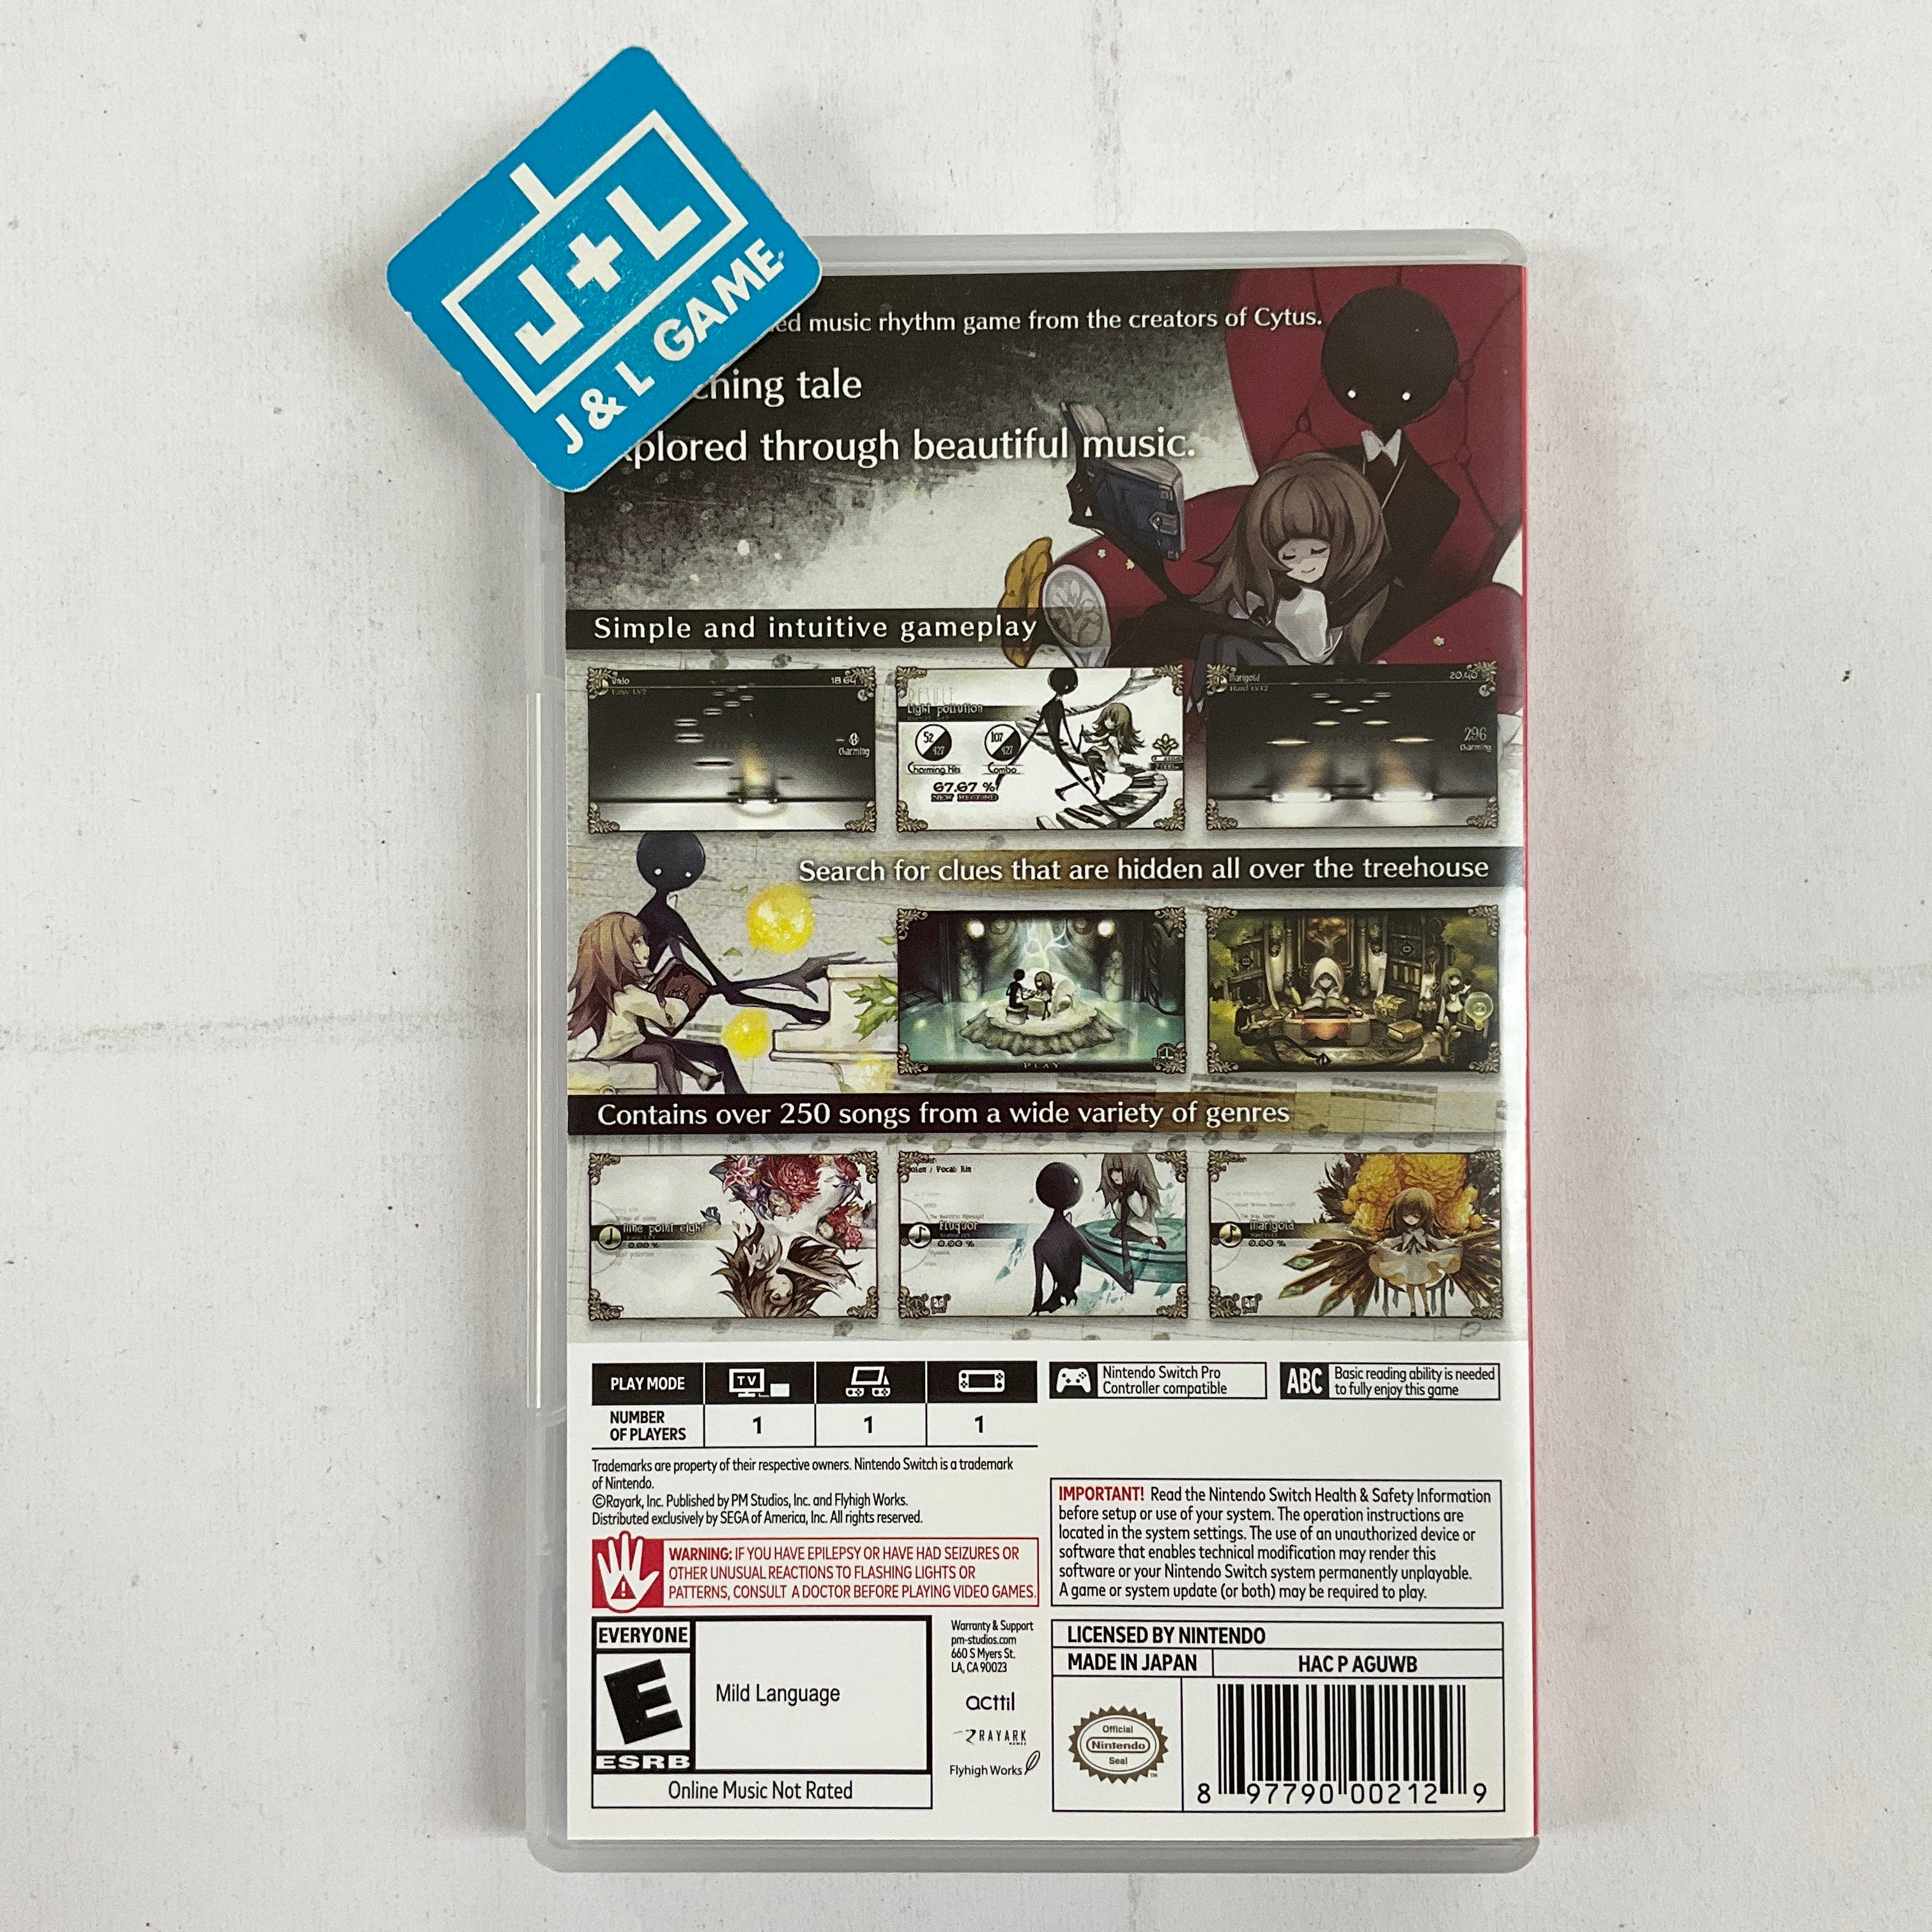 Deemo - (NSW) Nintendo Switch [Pre-Owned] Video Games PM Studios Inc.   